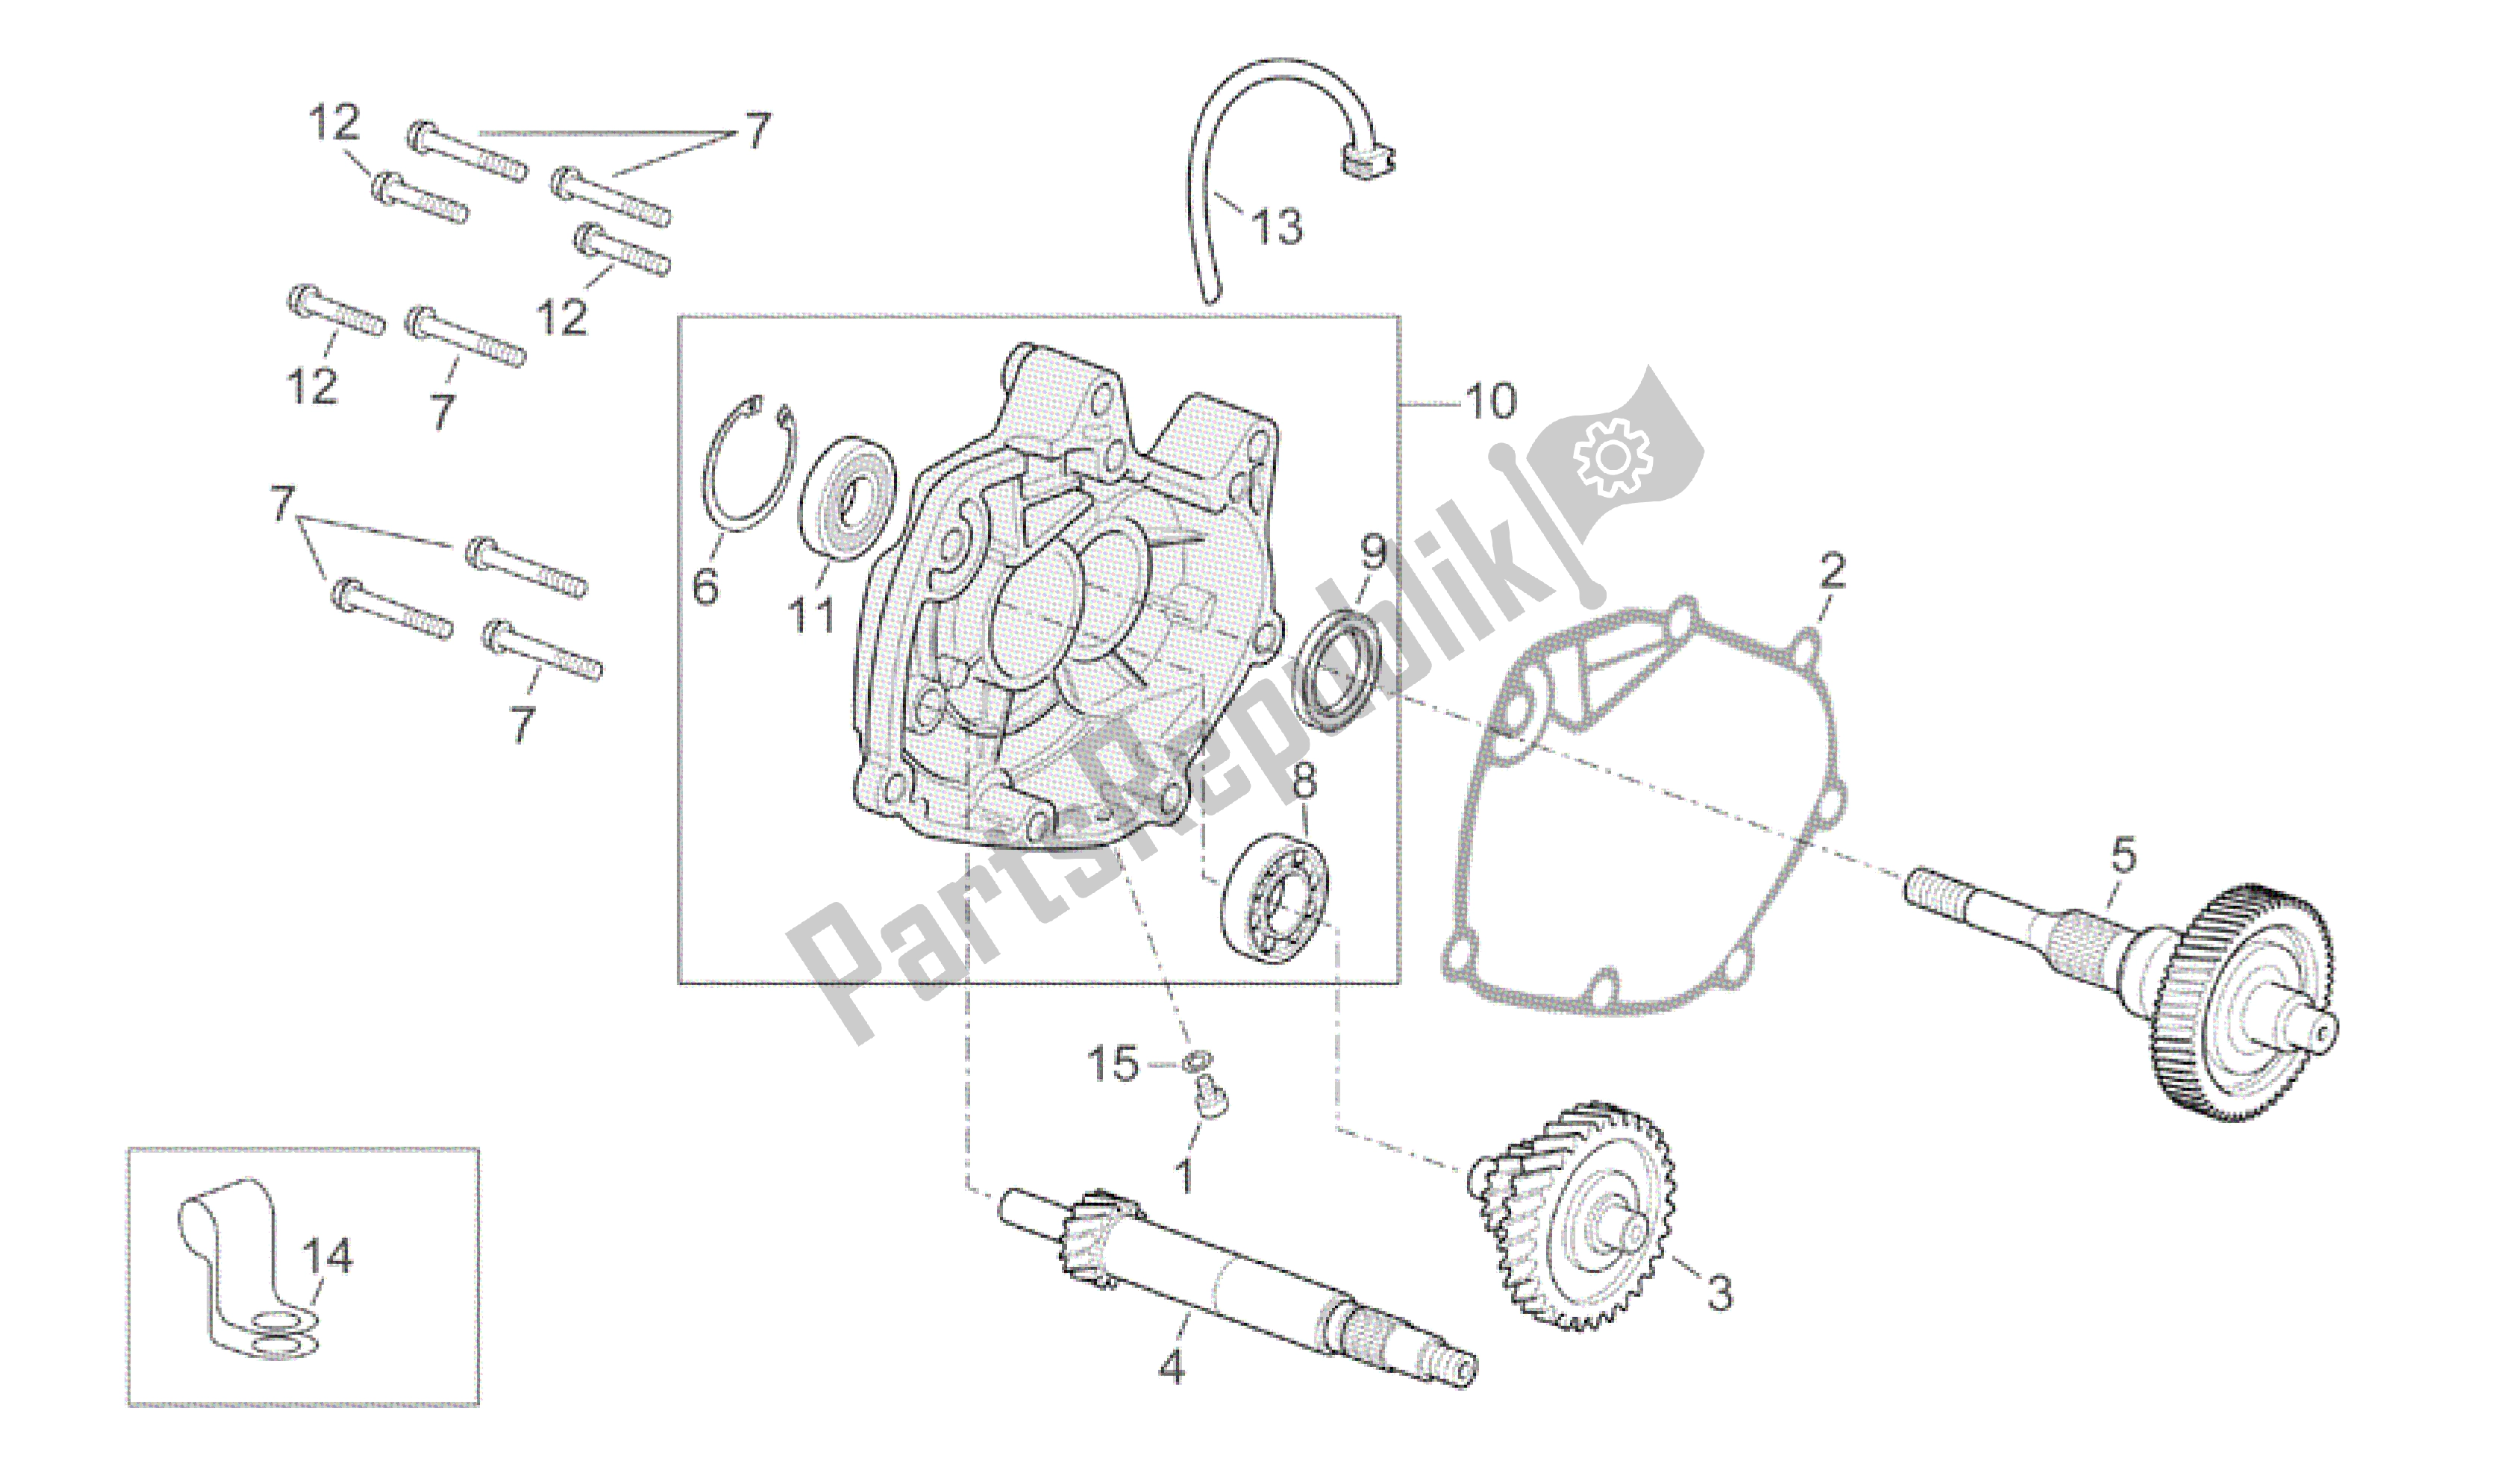 All parts for the Transmission of the Aprilia Scarabeo 500 2003 - 2006